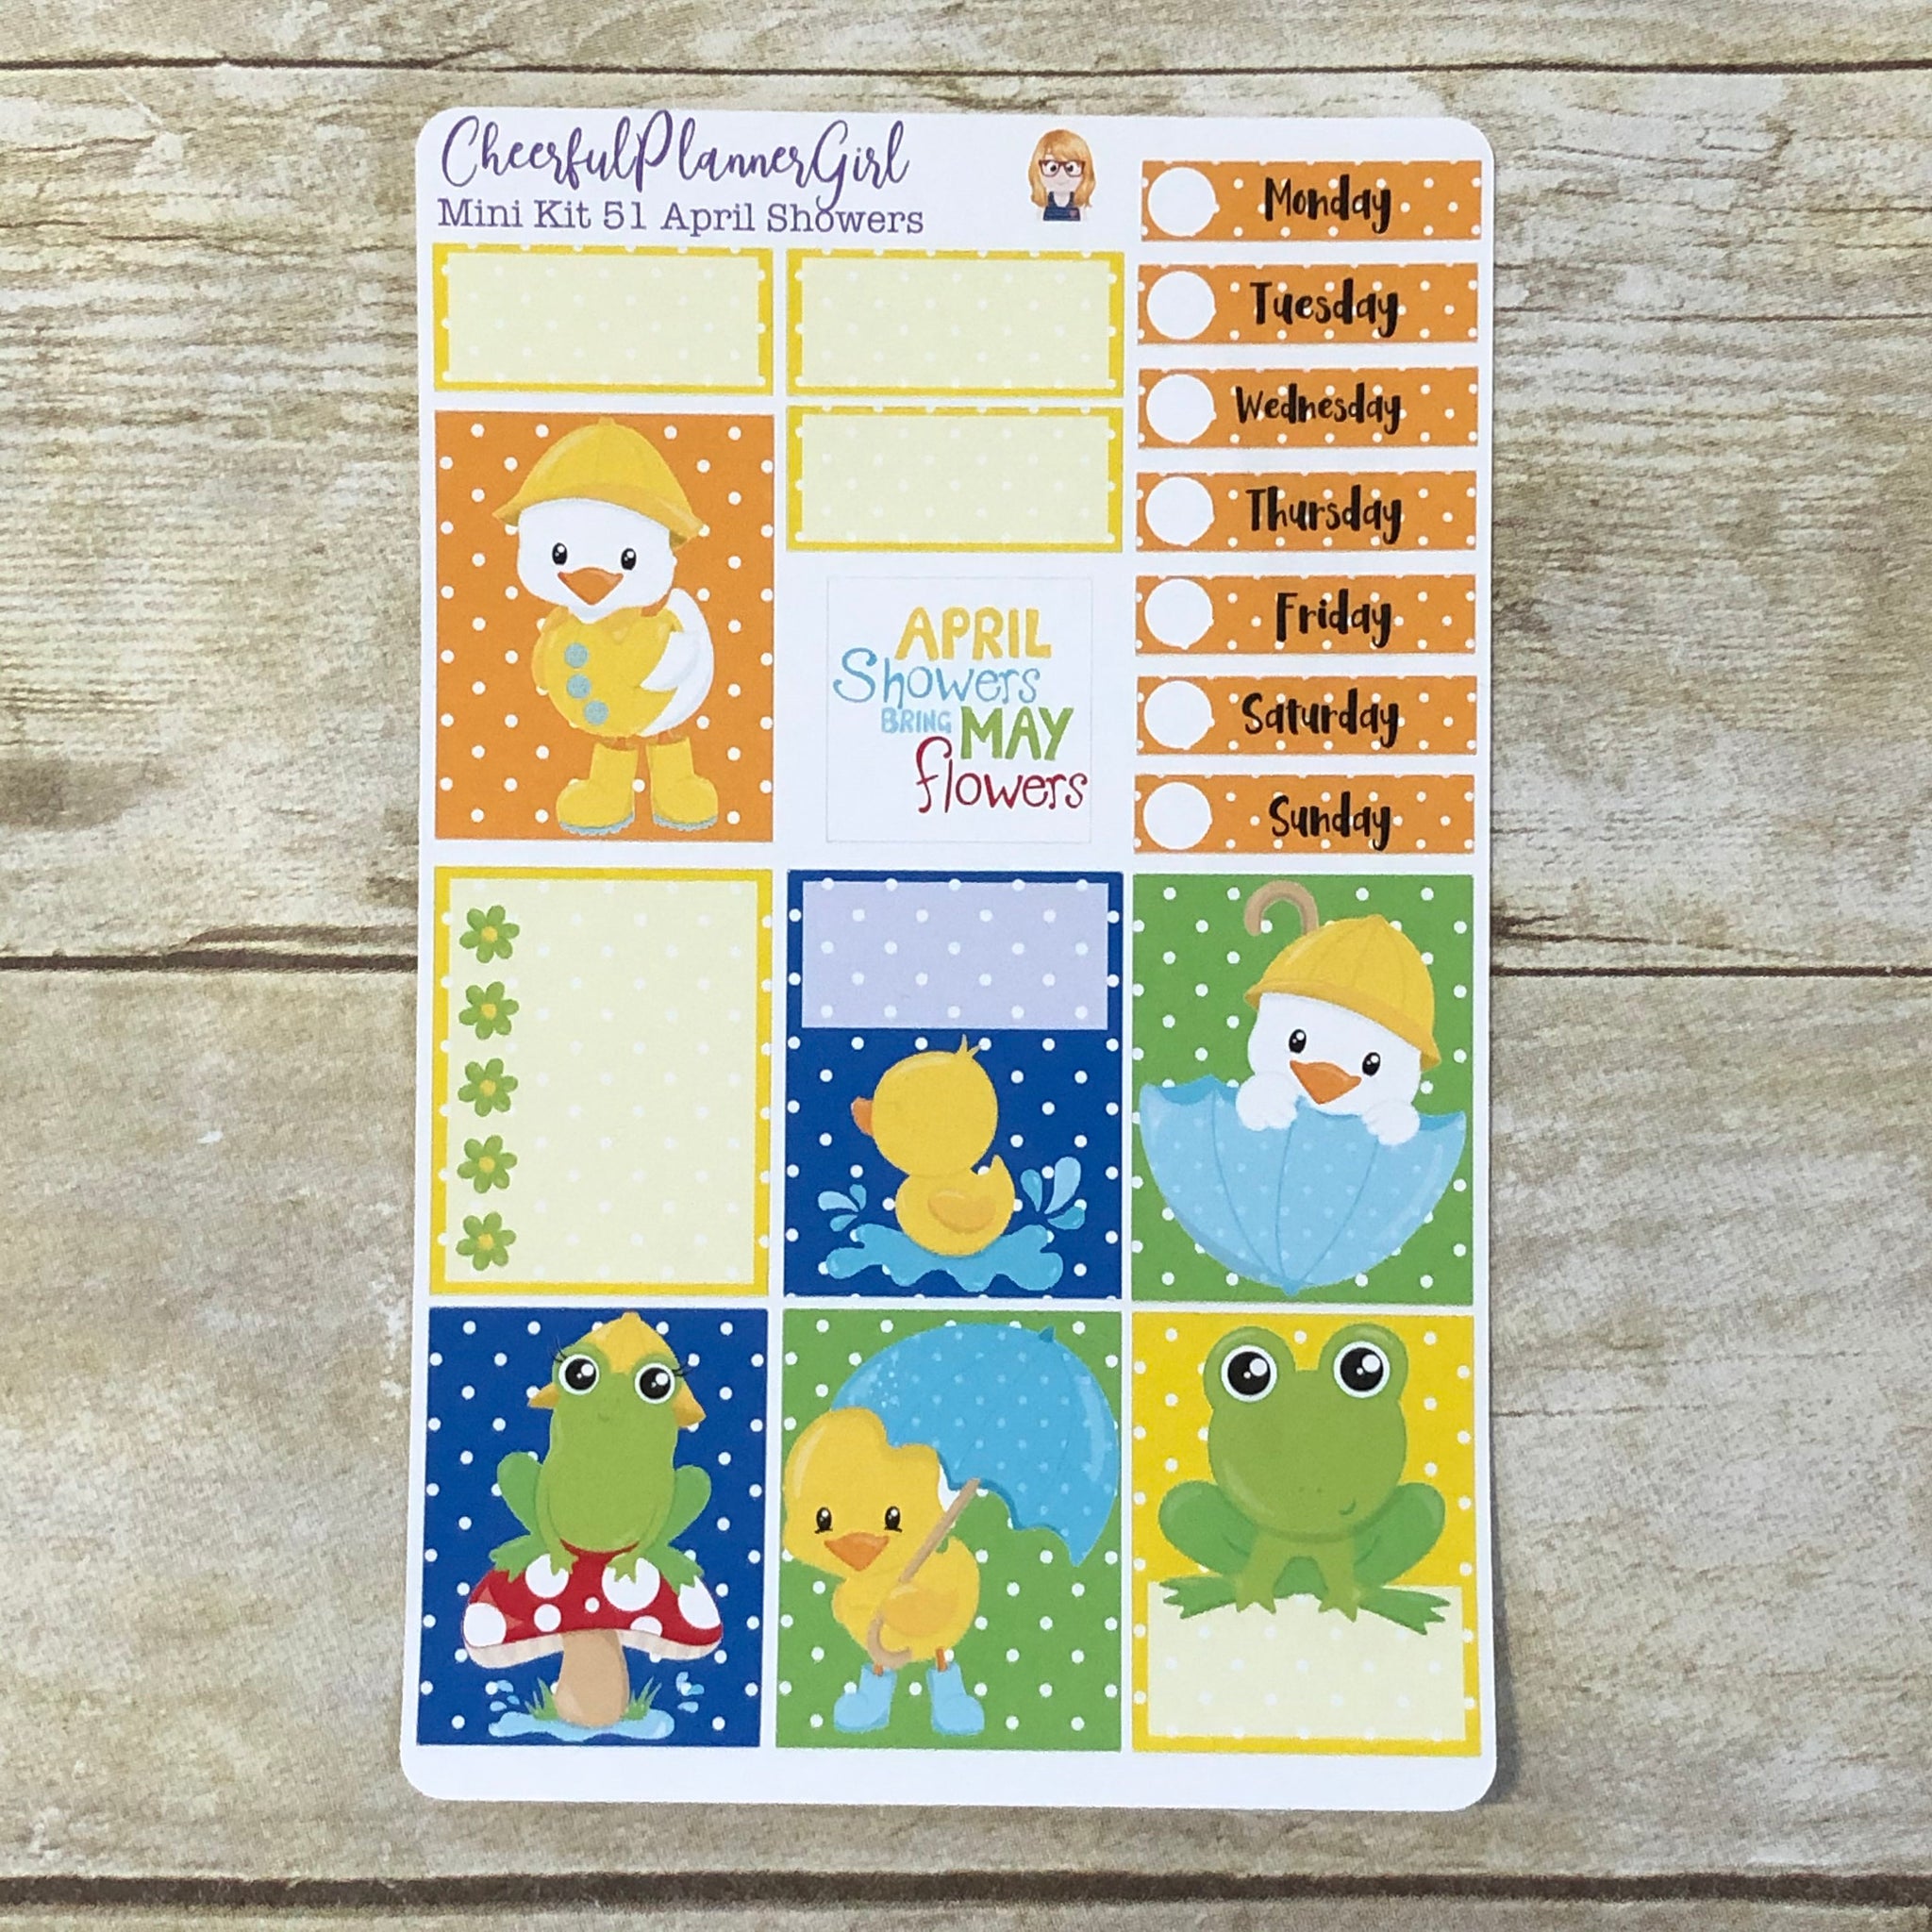 April Showers Mini Kit Weekly Layout Planner Stickers